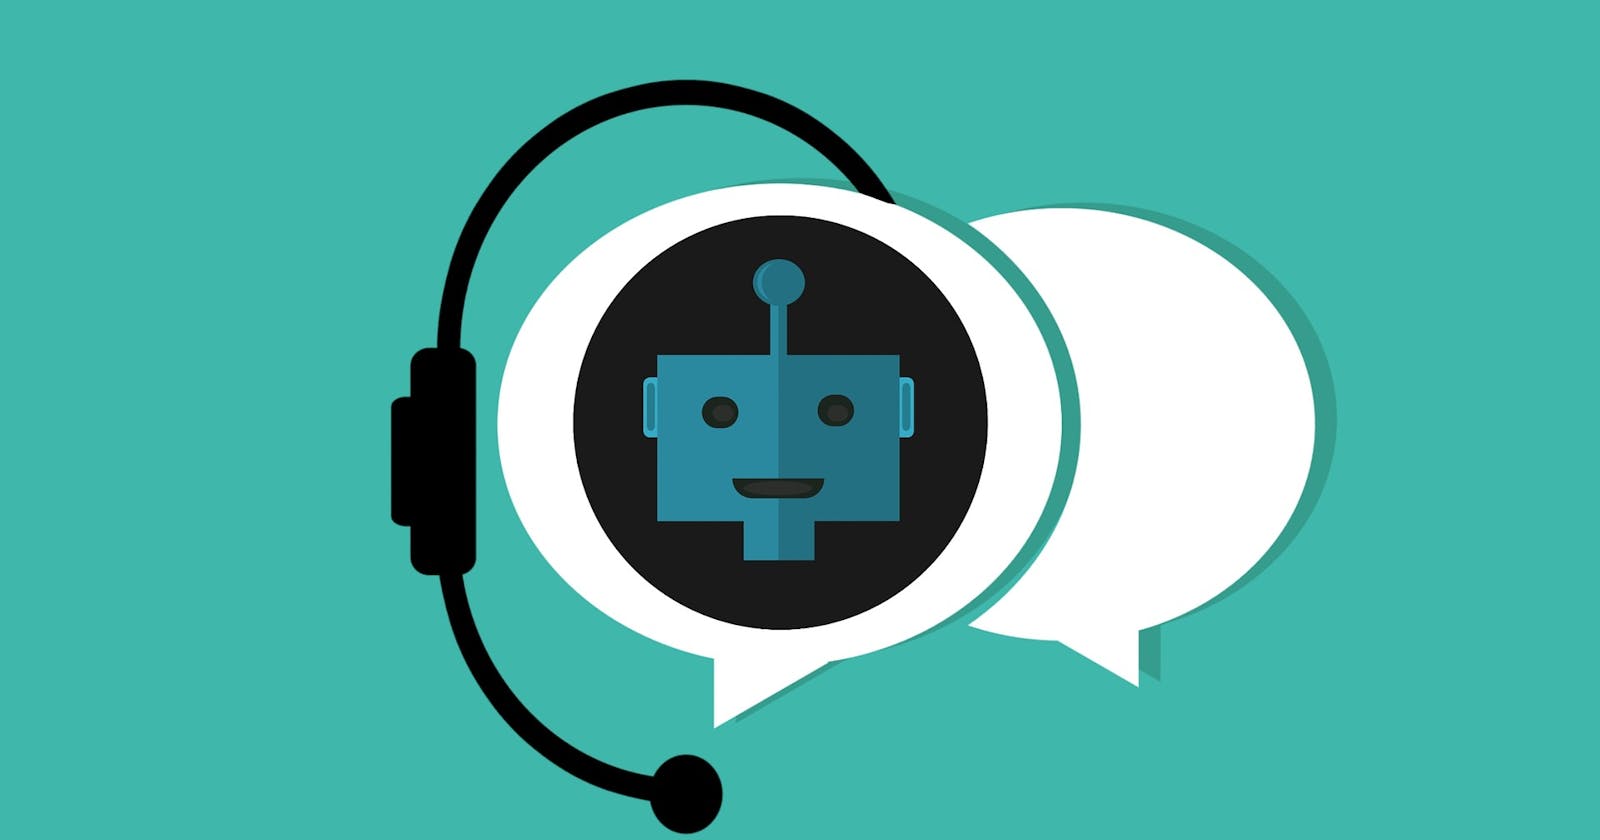 Learn how to build a simple chatbot app in Python